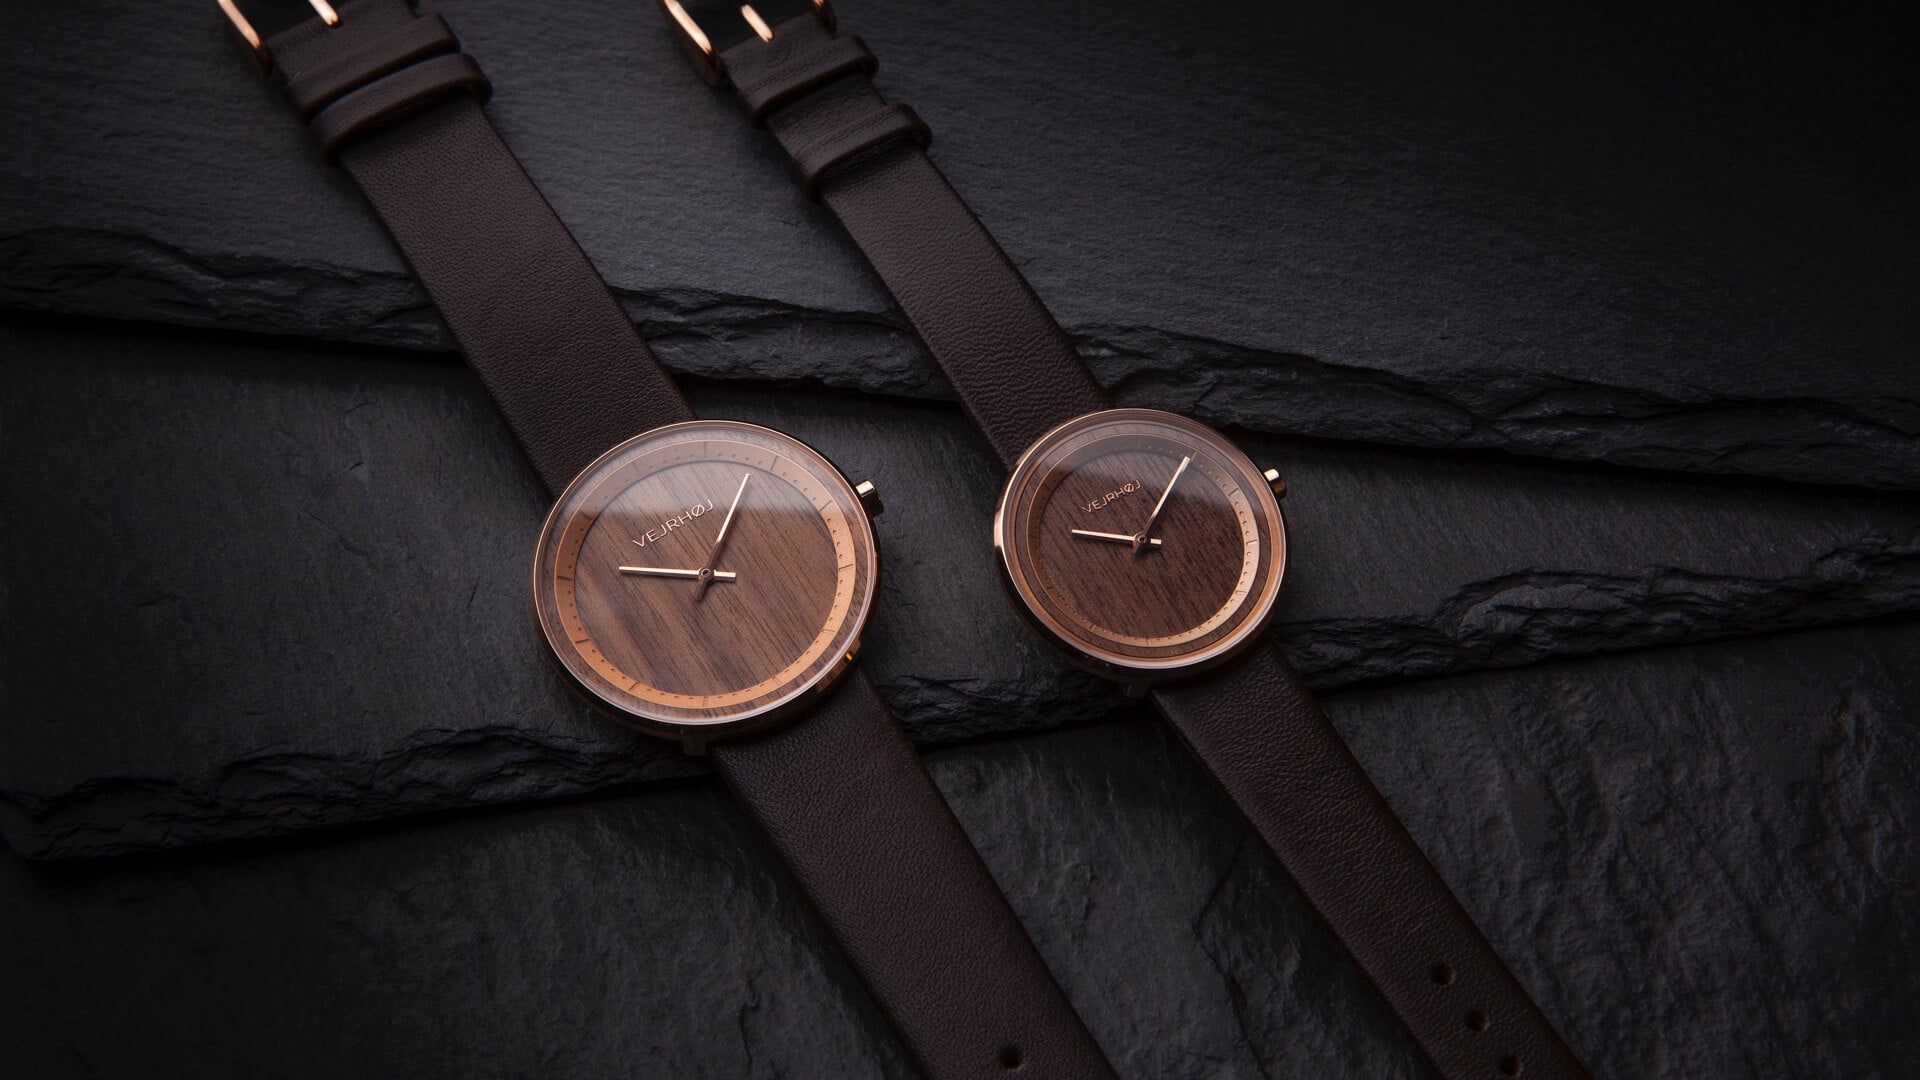 The ROSE unisex wood watch 